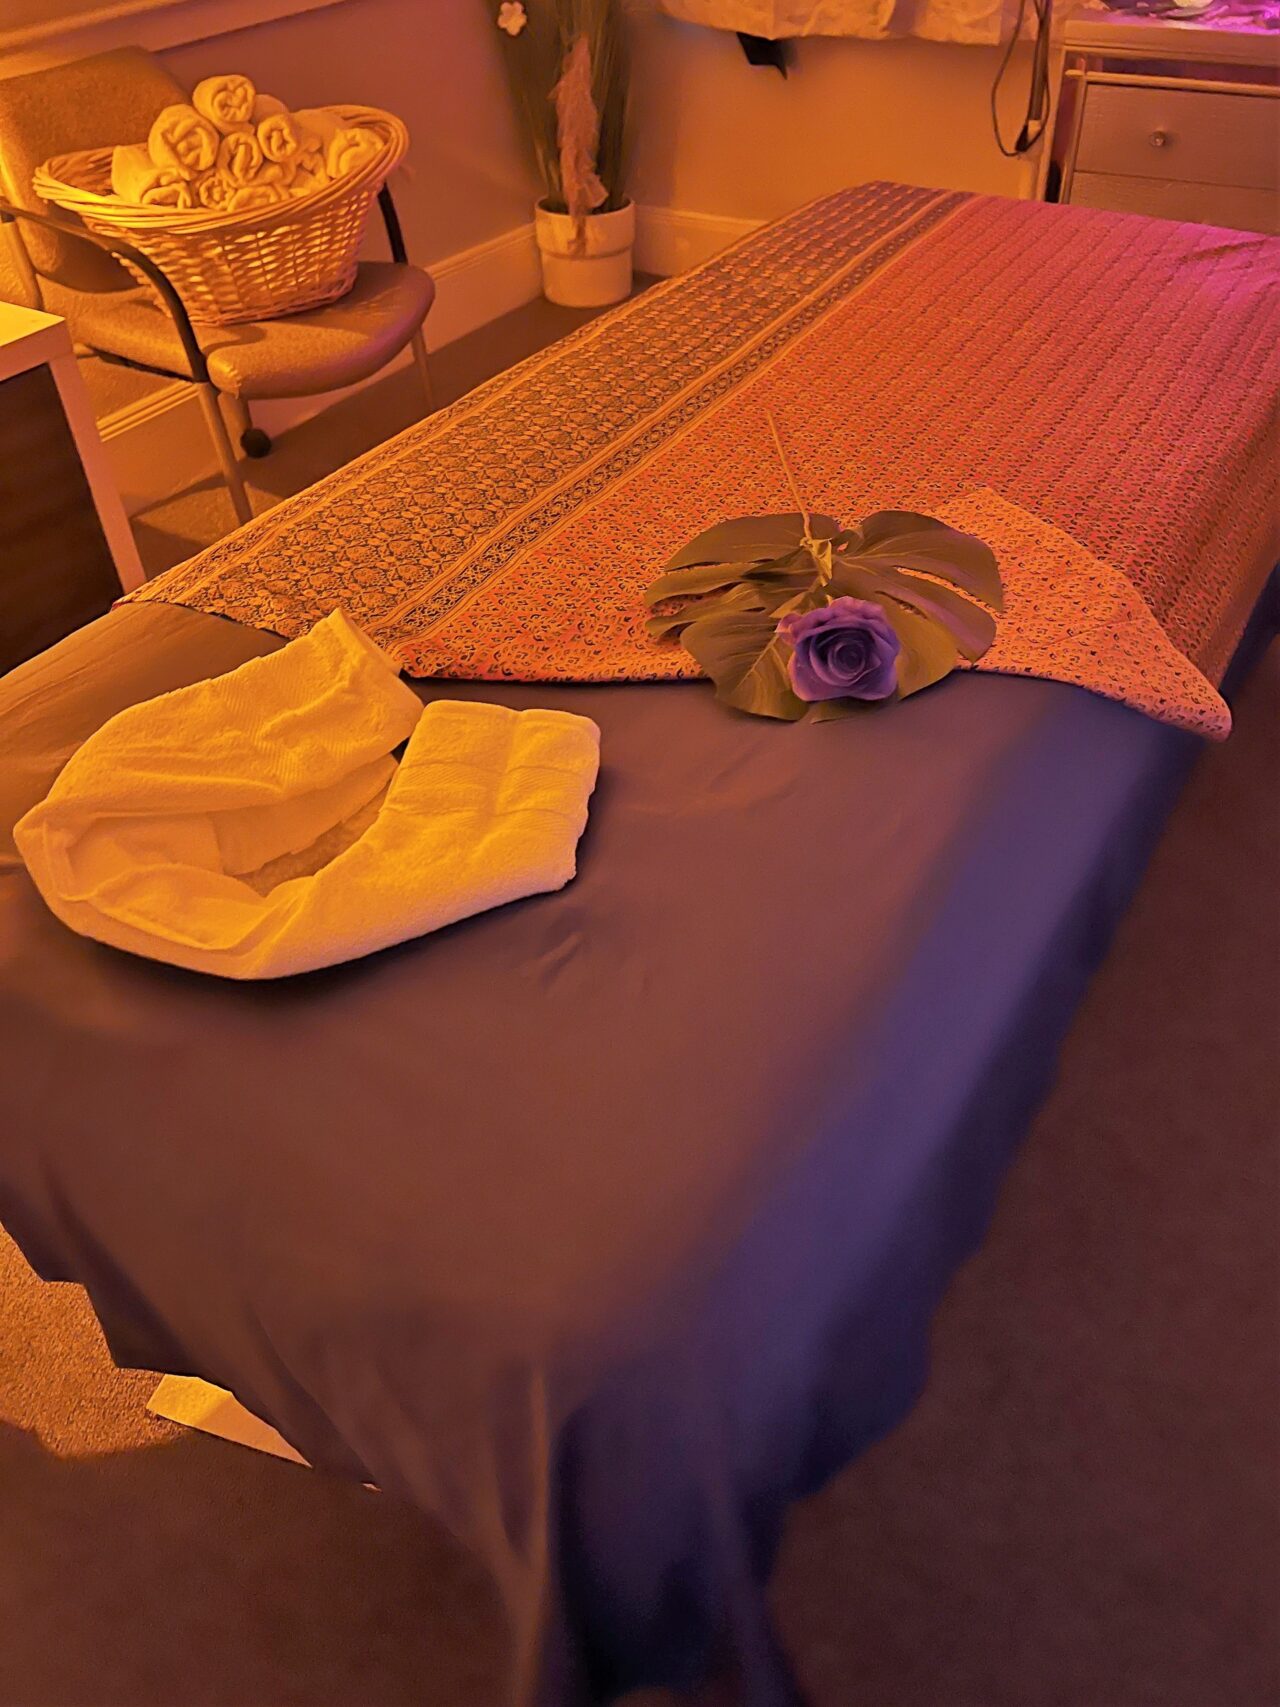 Crystal Thai Spa Massage Norwood Best Thai Massage Near Norwood Experience Relief For Your